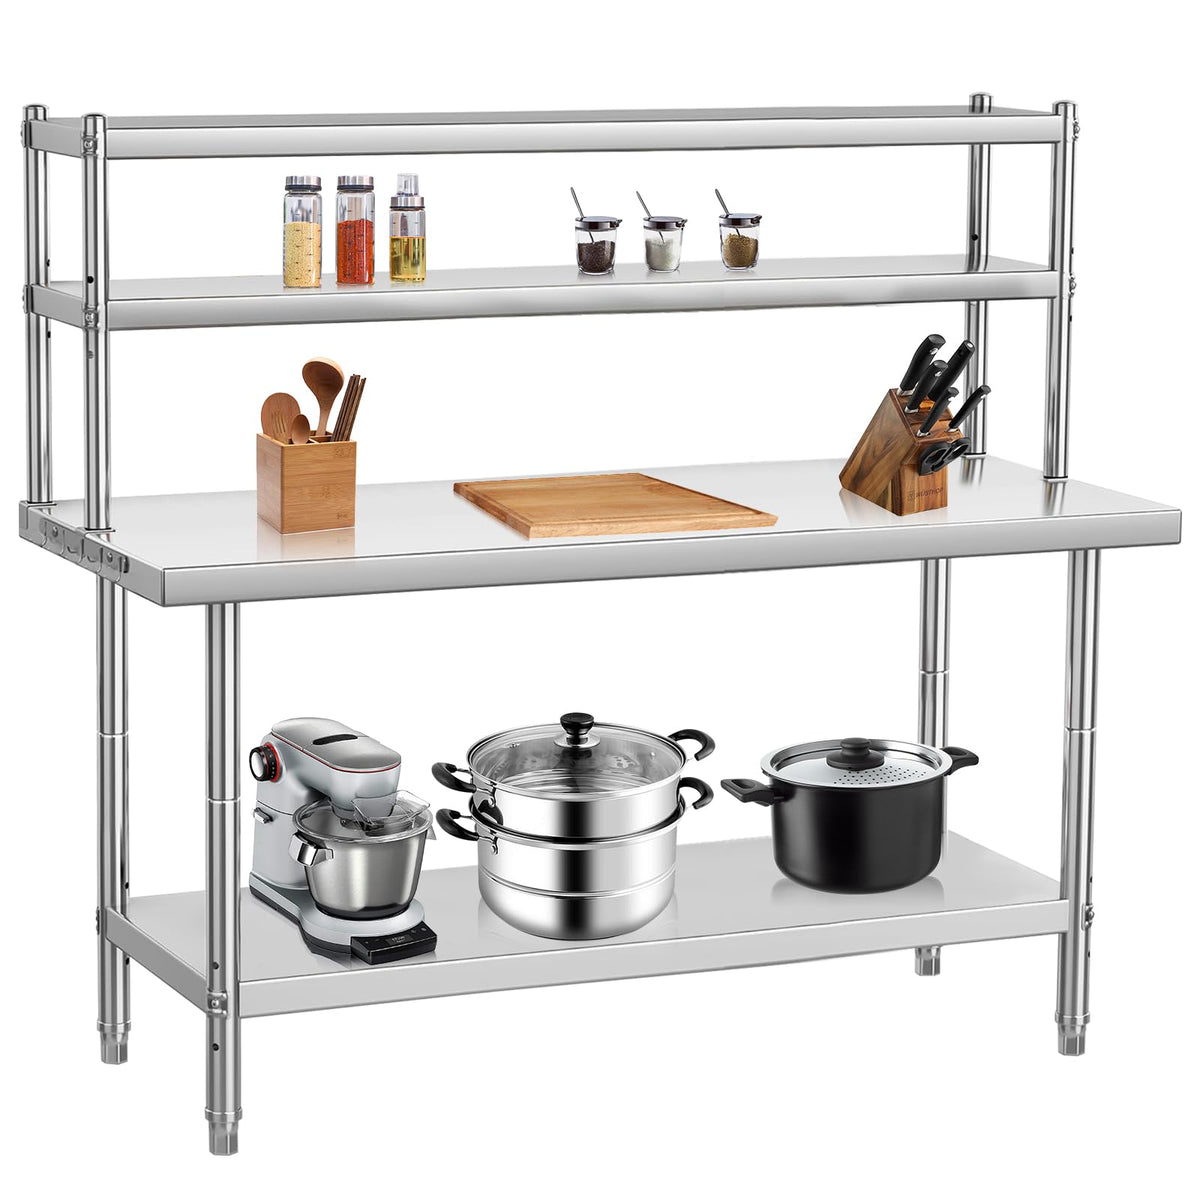 Stainless Steel Table with Overshelves, 36" X 24" Commercial Work Table with 36" X 12" Shelf, Metal Kitchen Prep Table & Shelving Combo